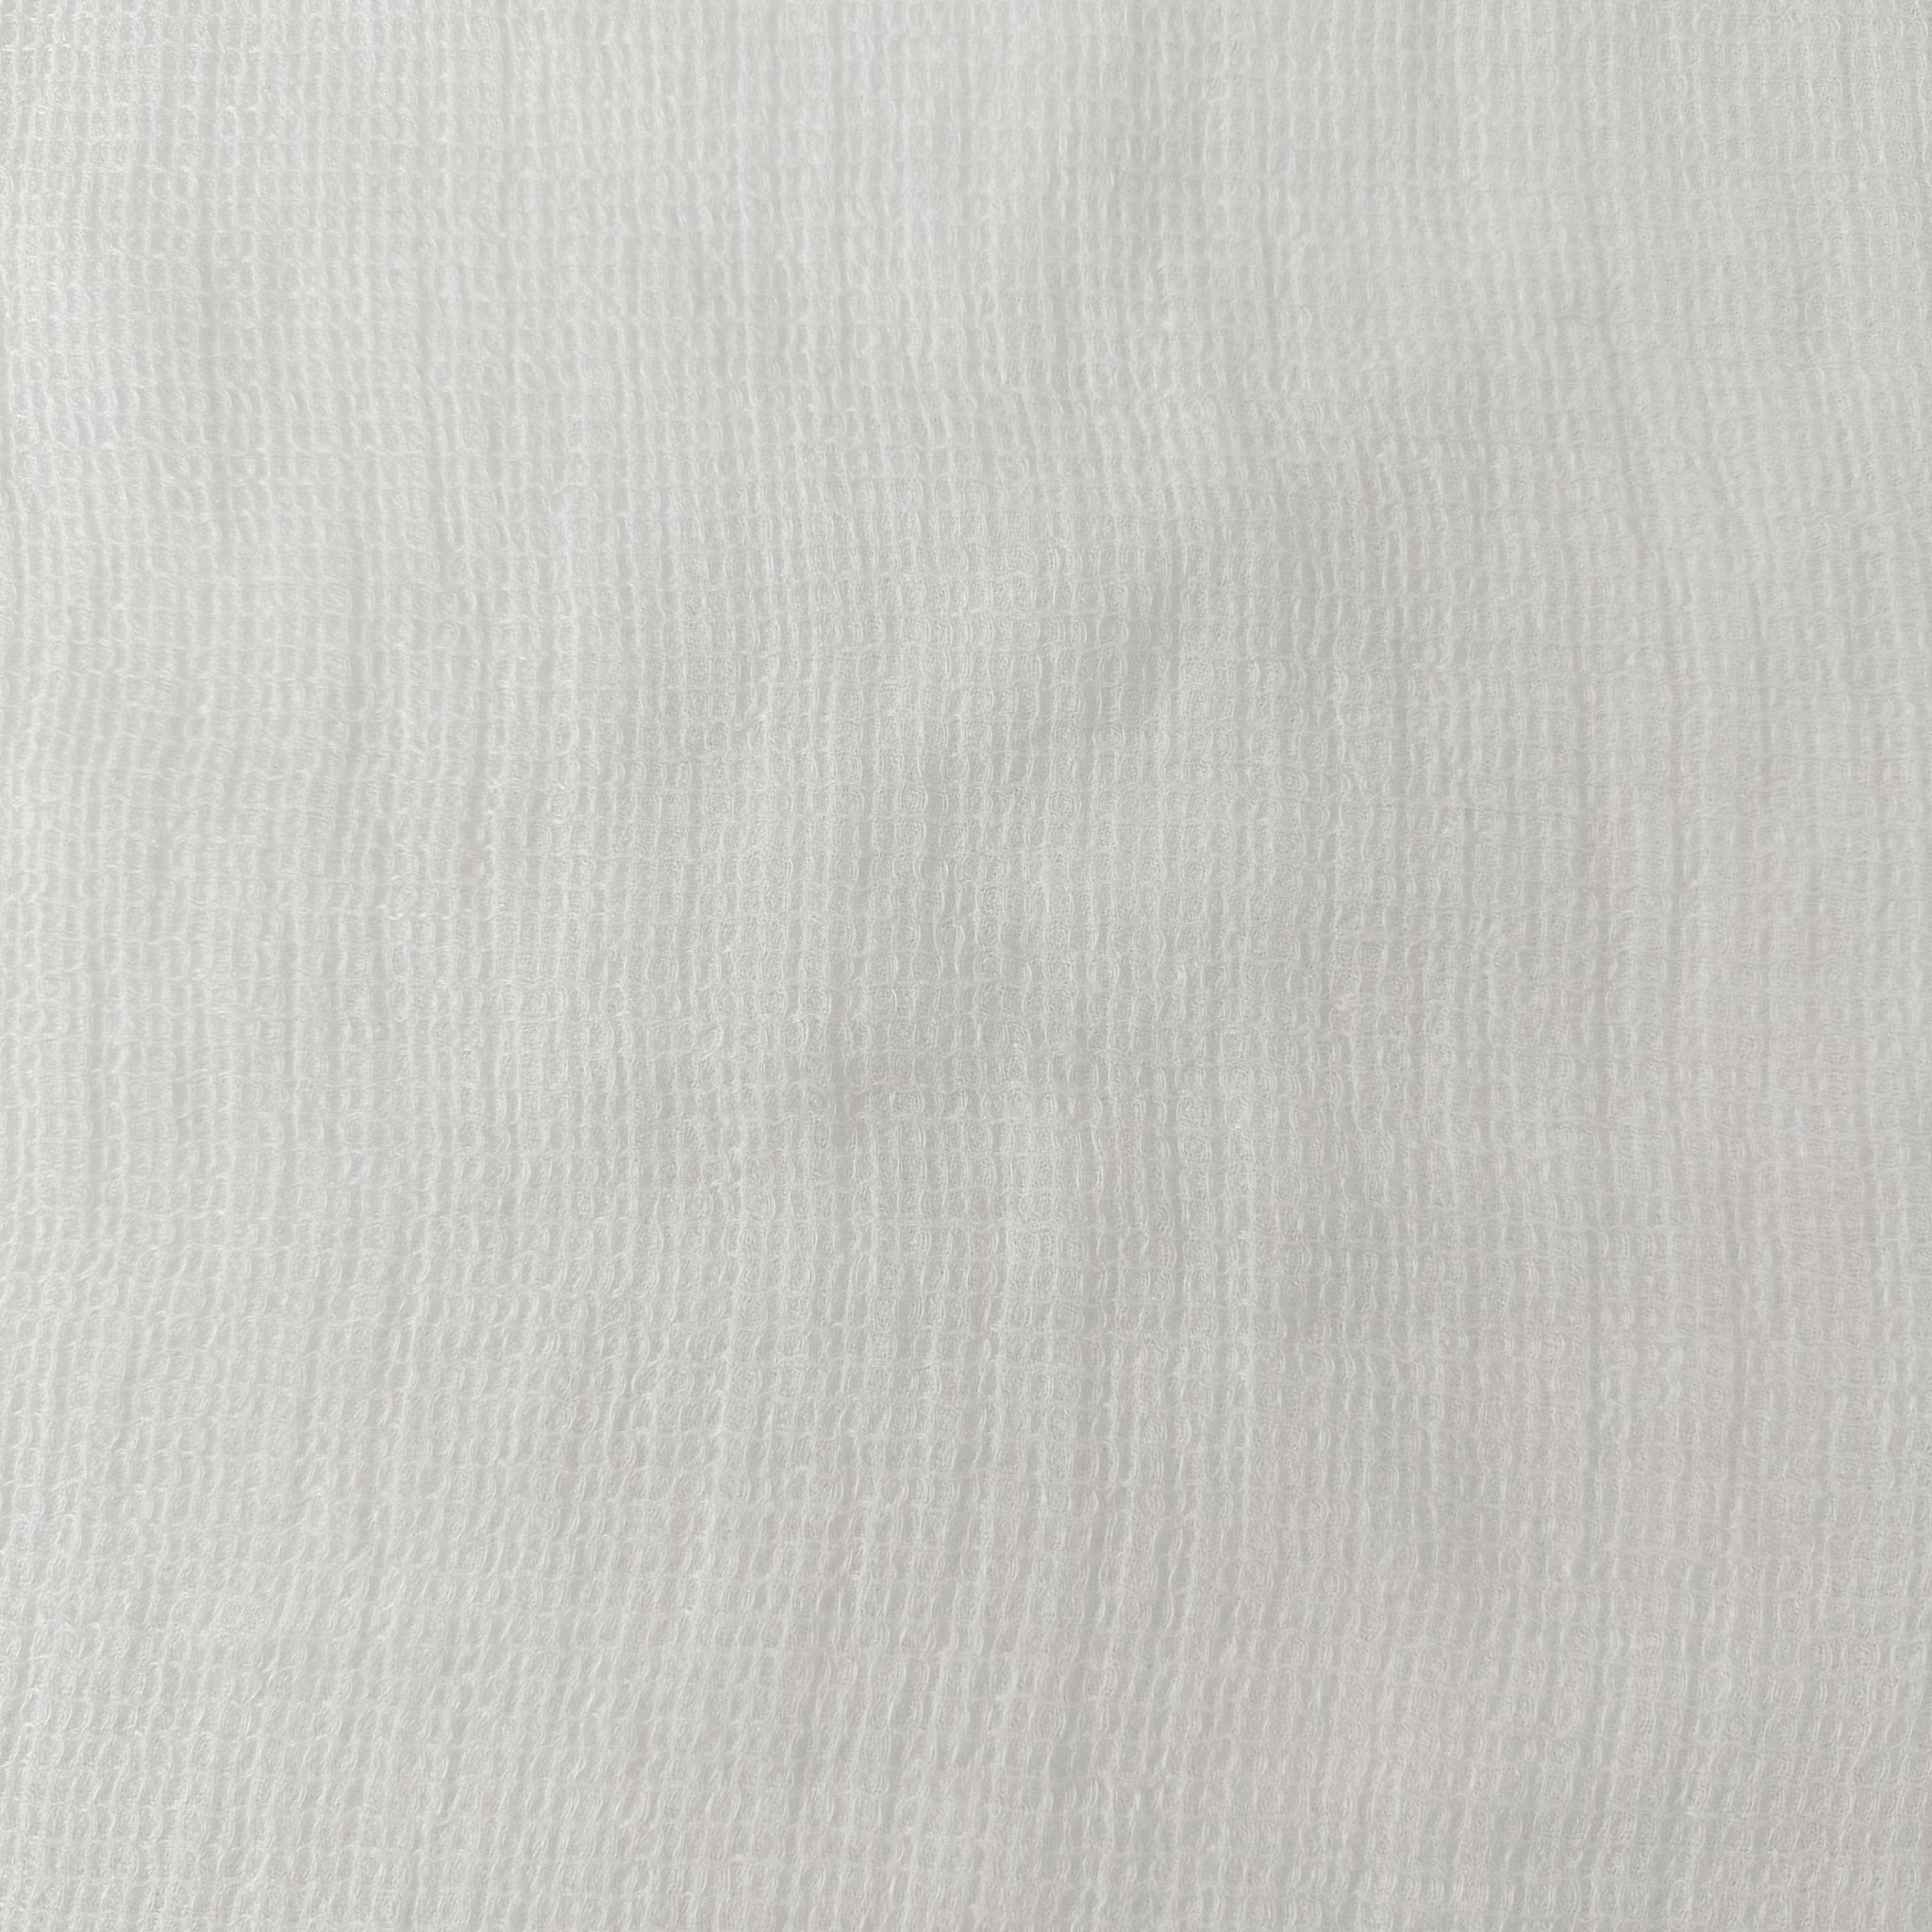 Linen Waffle Tweed Fabric 7349 7350 - The Linen Lab - White